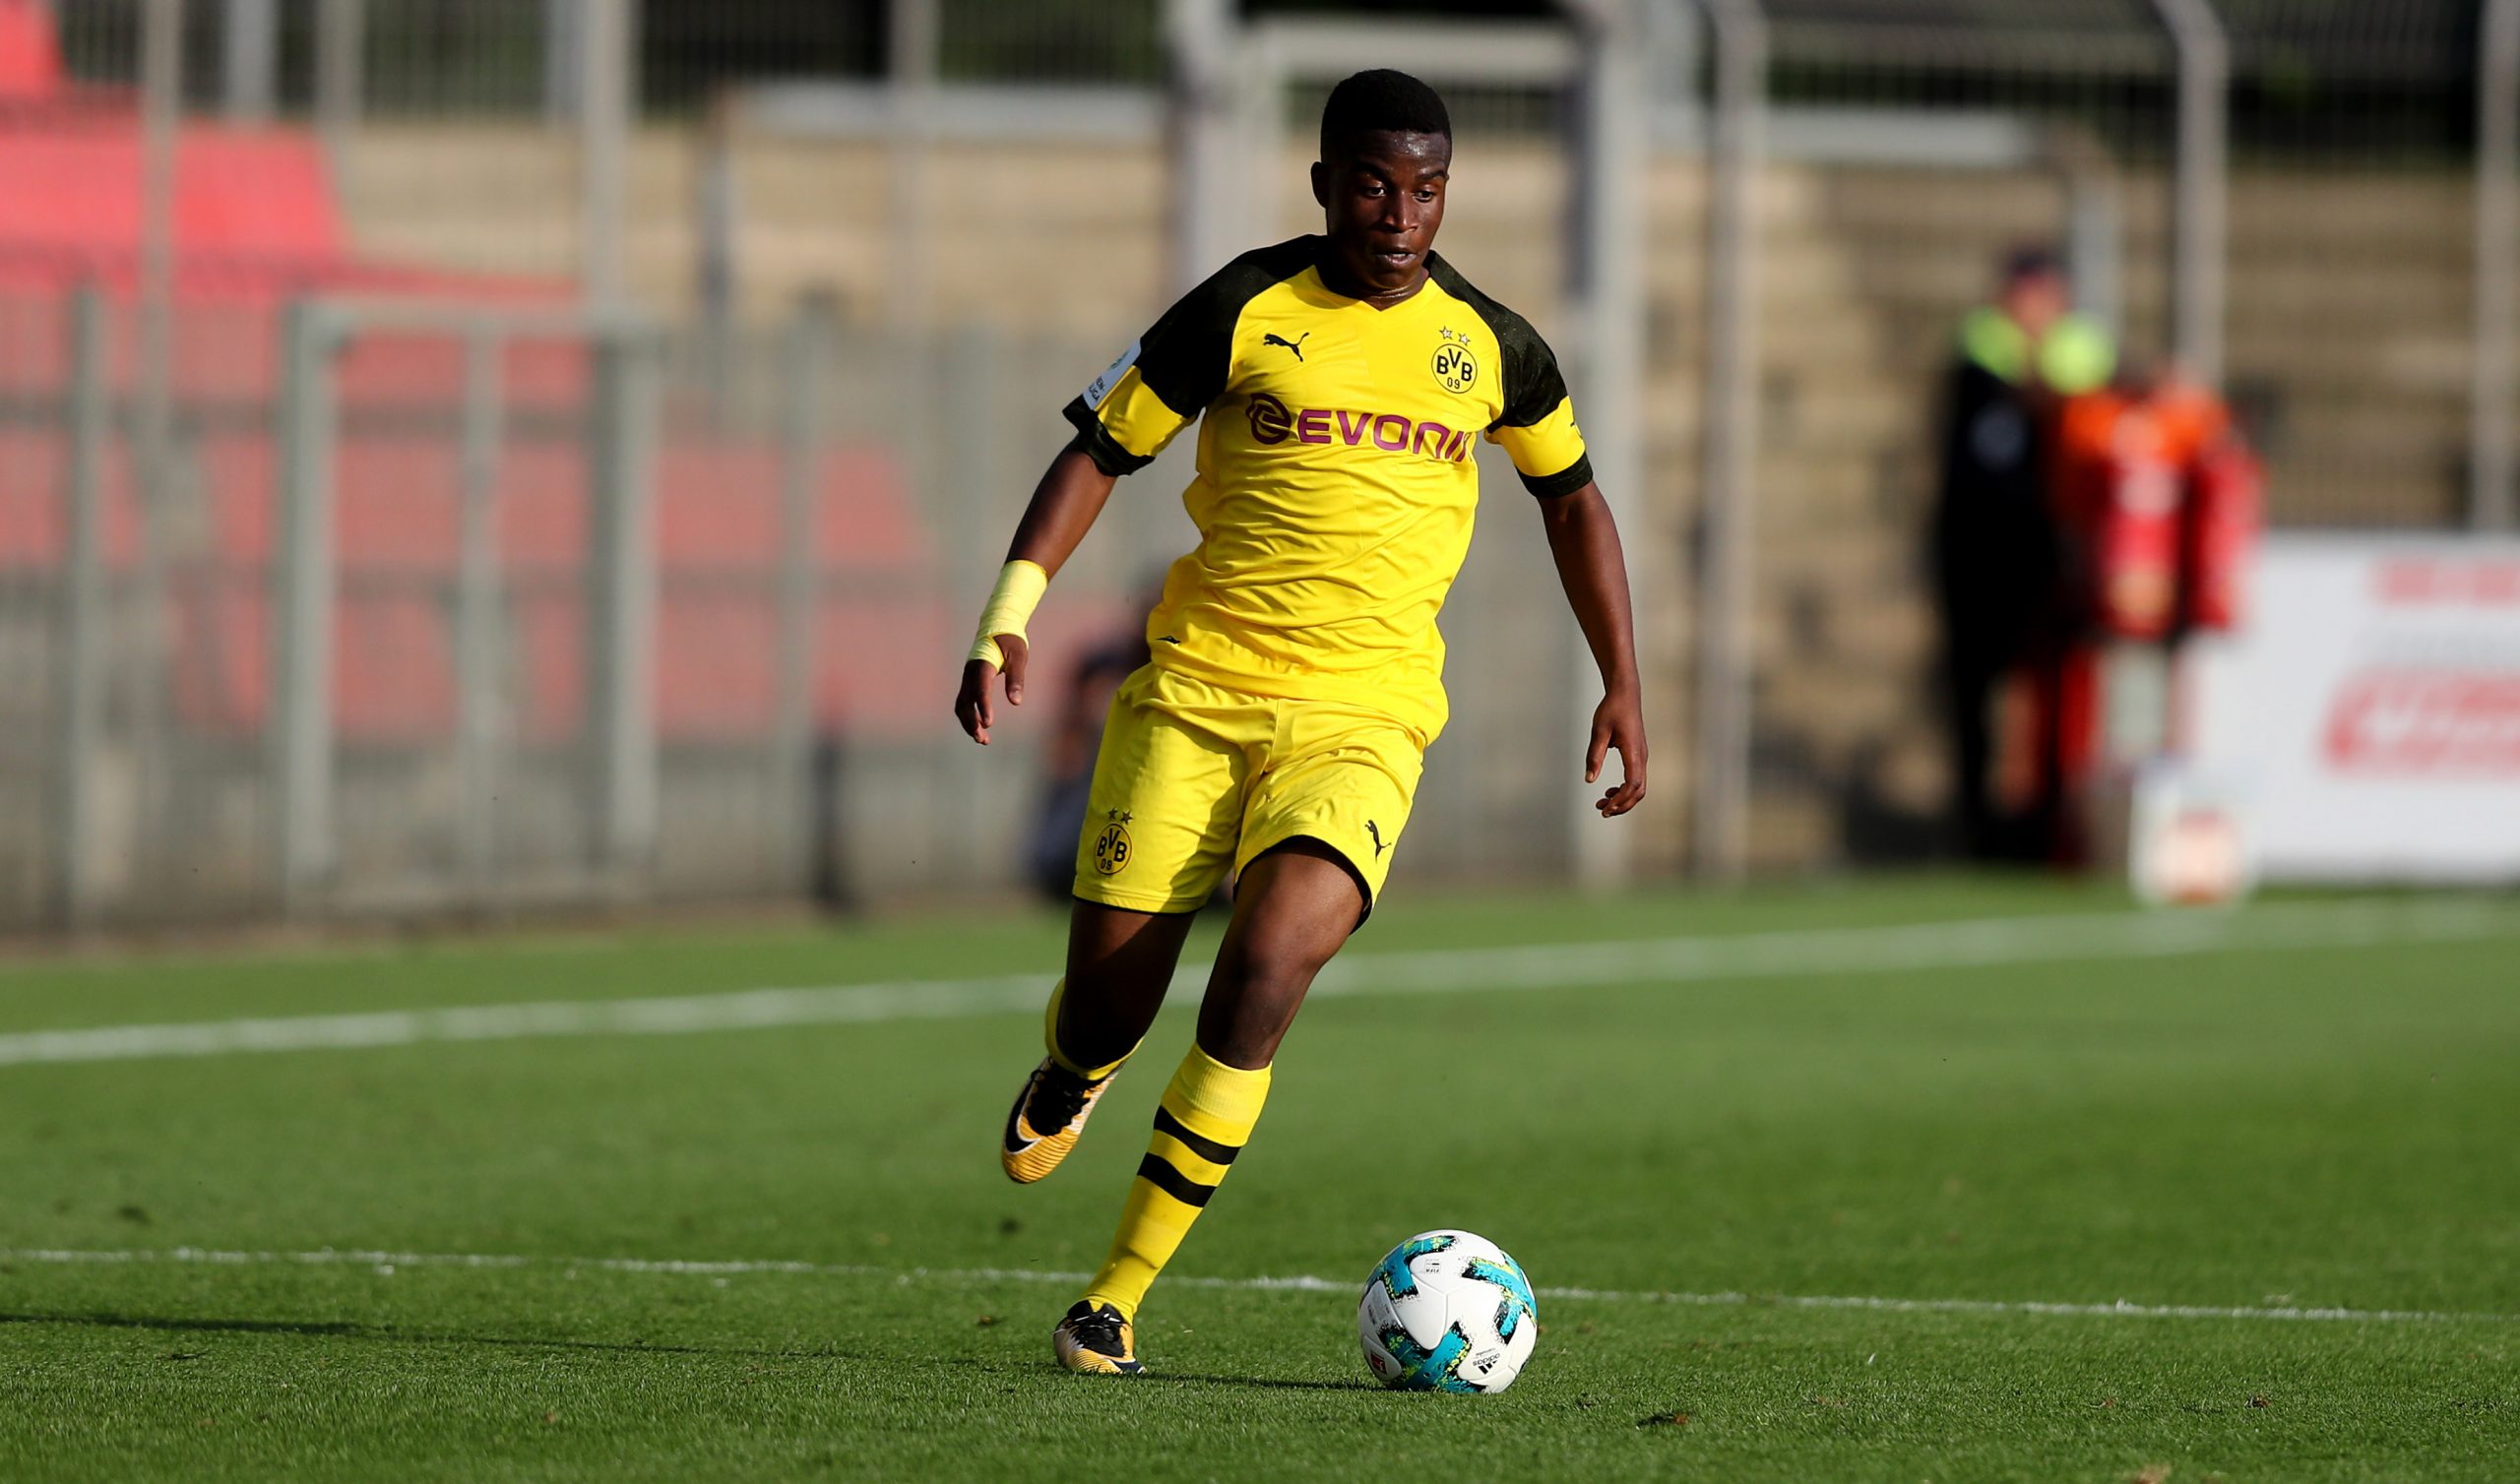 Borussia Dortmund chief willing to put his faith on Moukoko who is in action in the photo